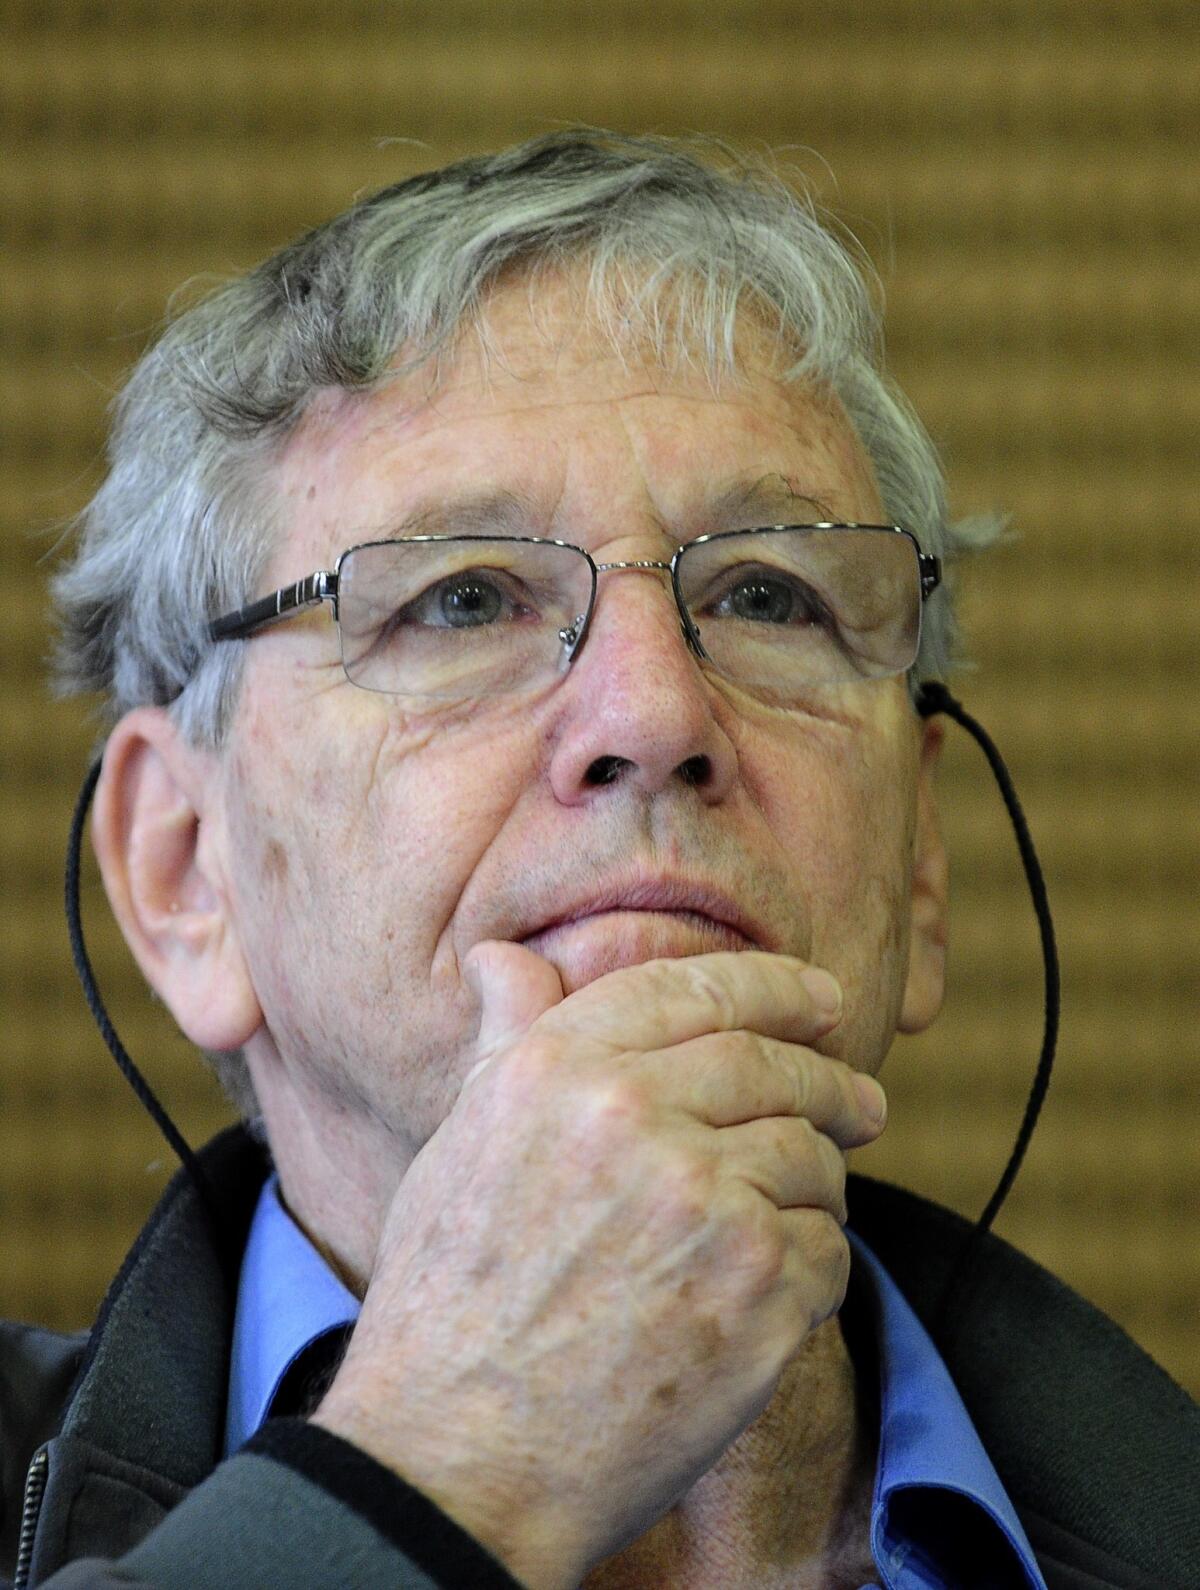 Israeli writer Amos Oz has been named winner of the Franz Kafka Prize for Literature 2013.